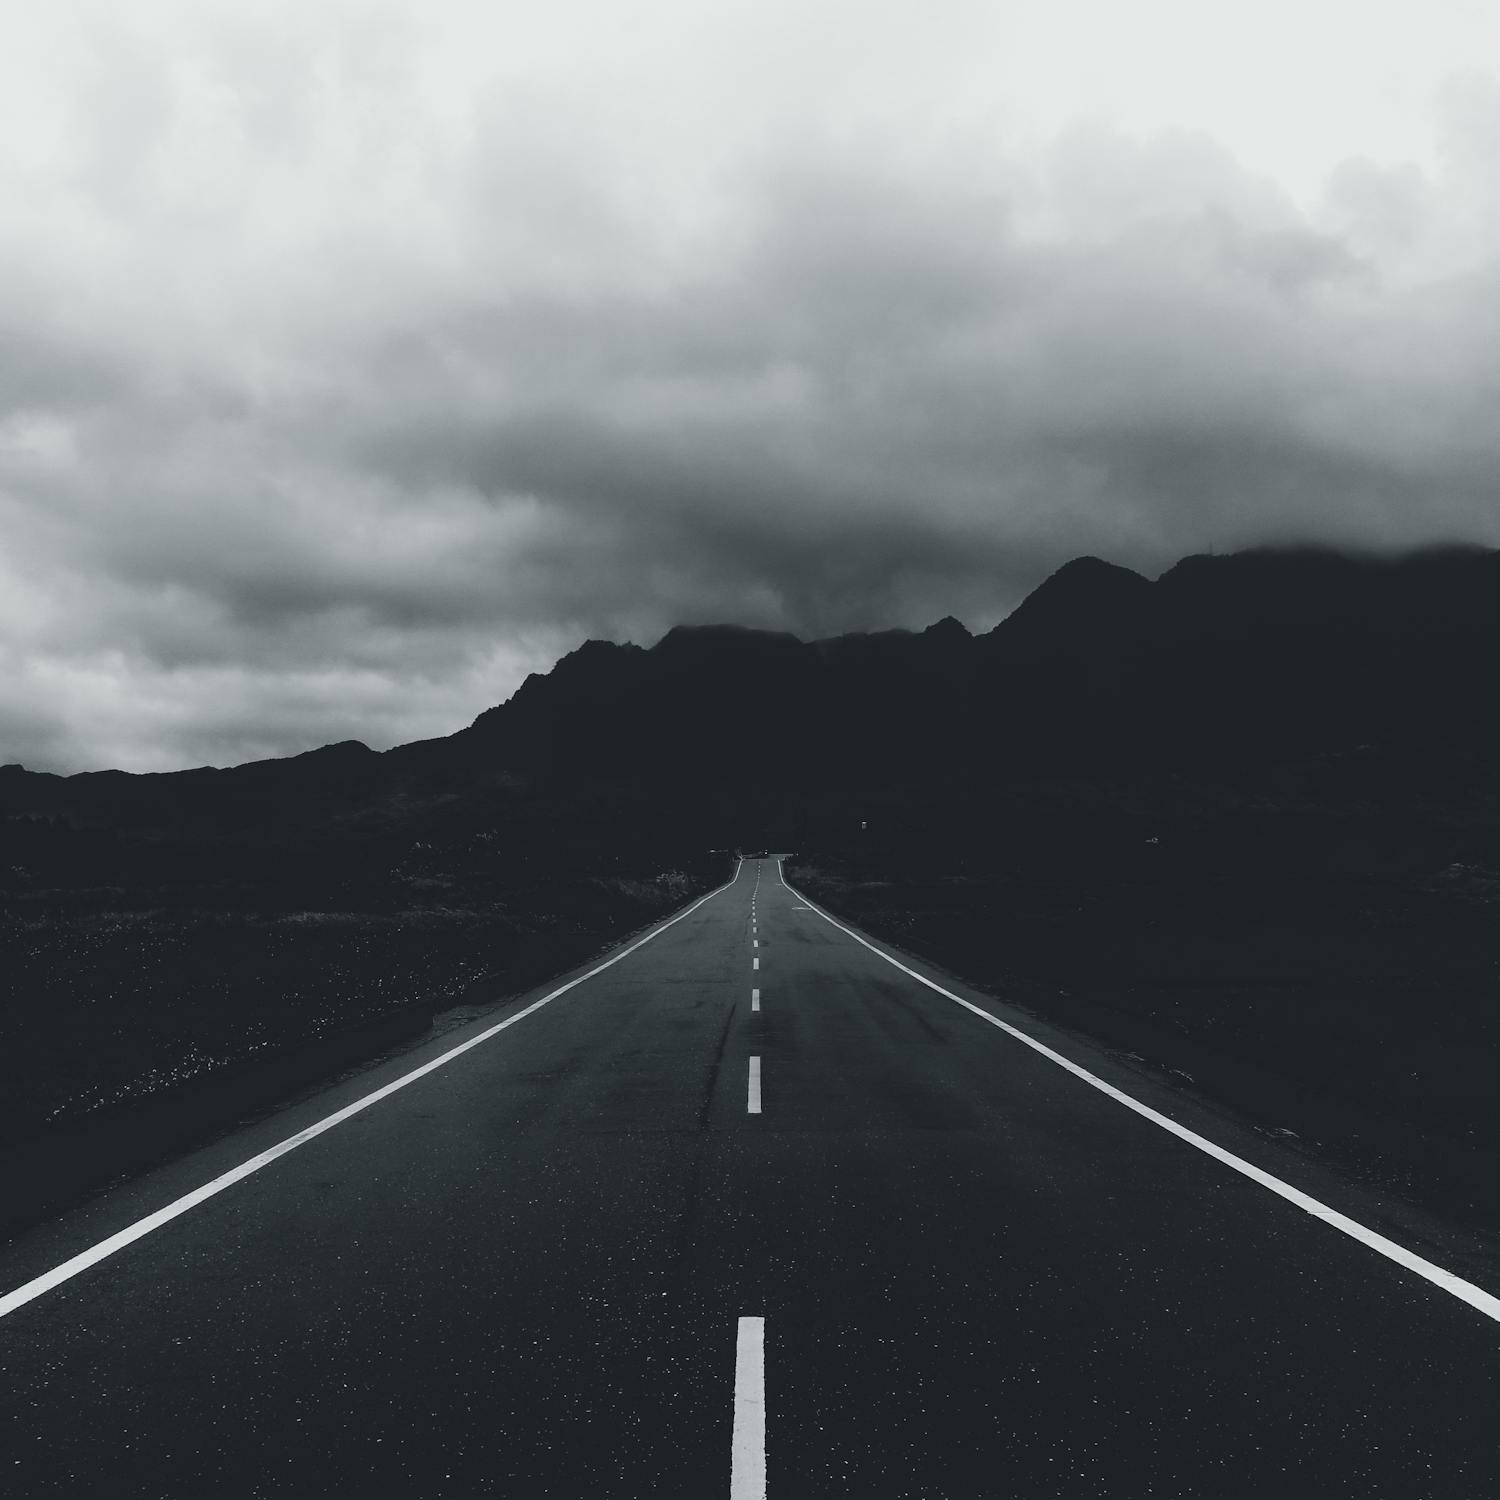 Grayscale Photo of a Road Heading to Mountain · Free Stock Photo